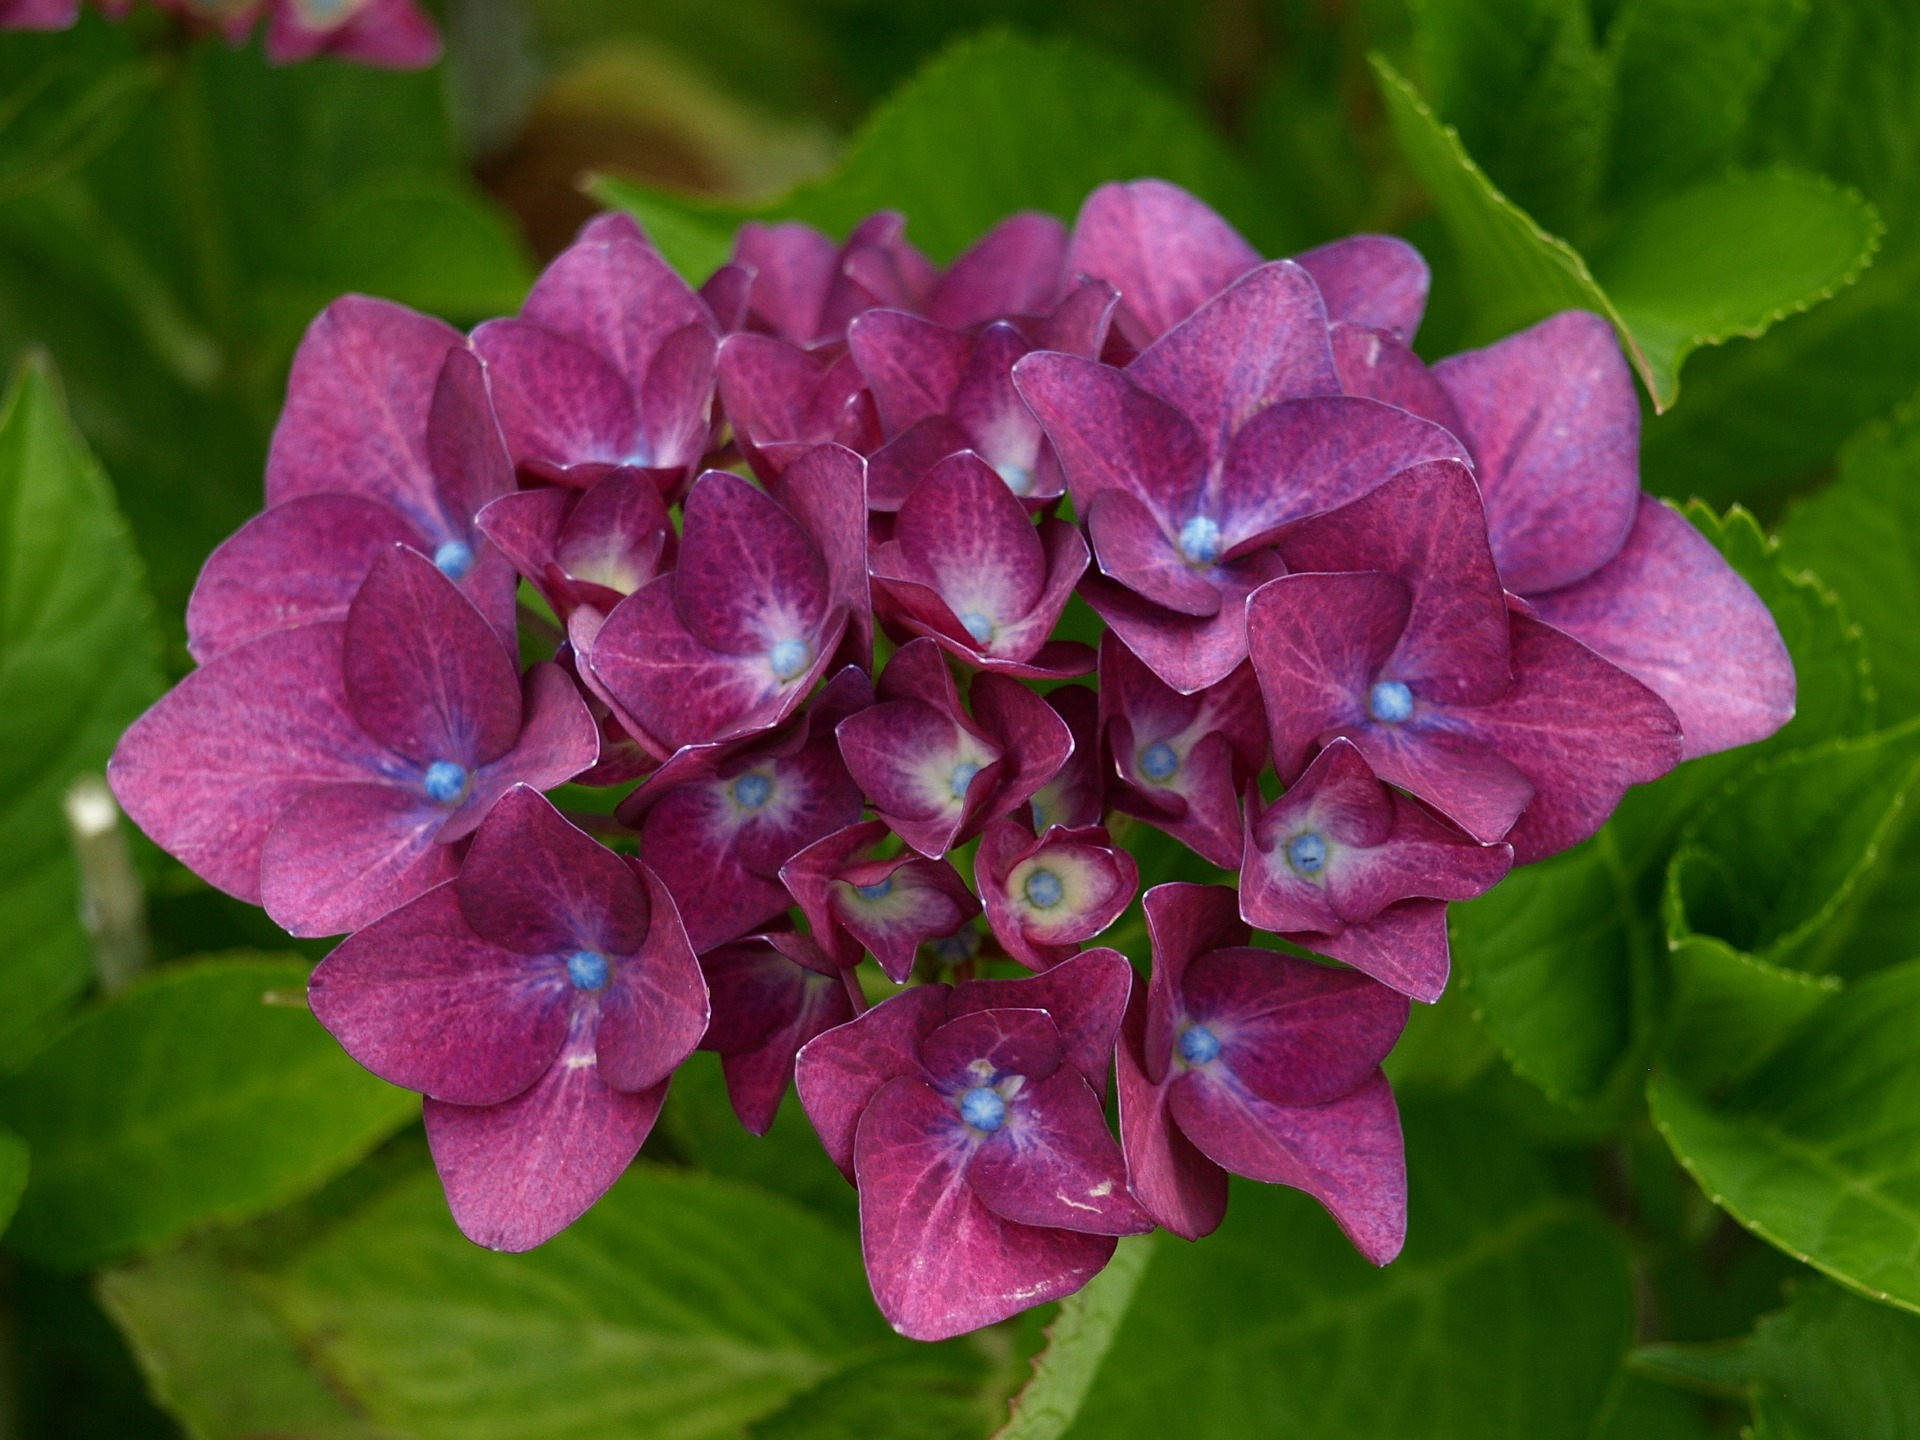 Care for hydrangeas by planting them in the right spot.